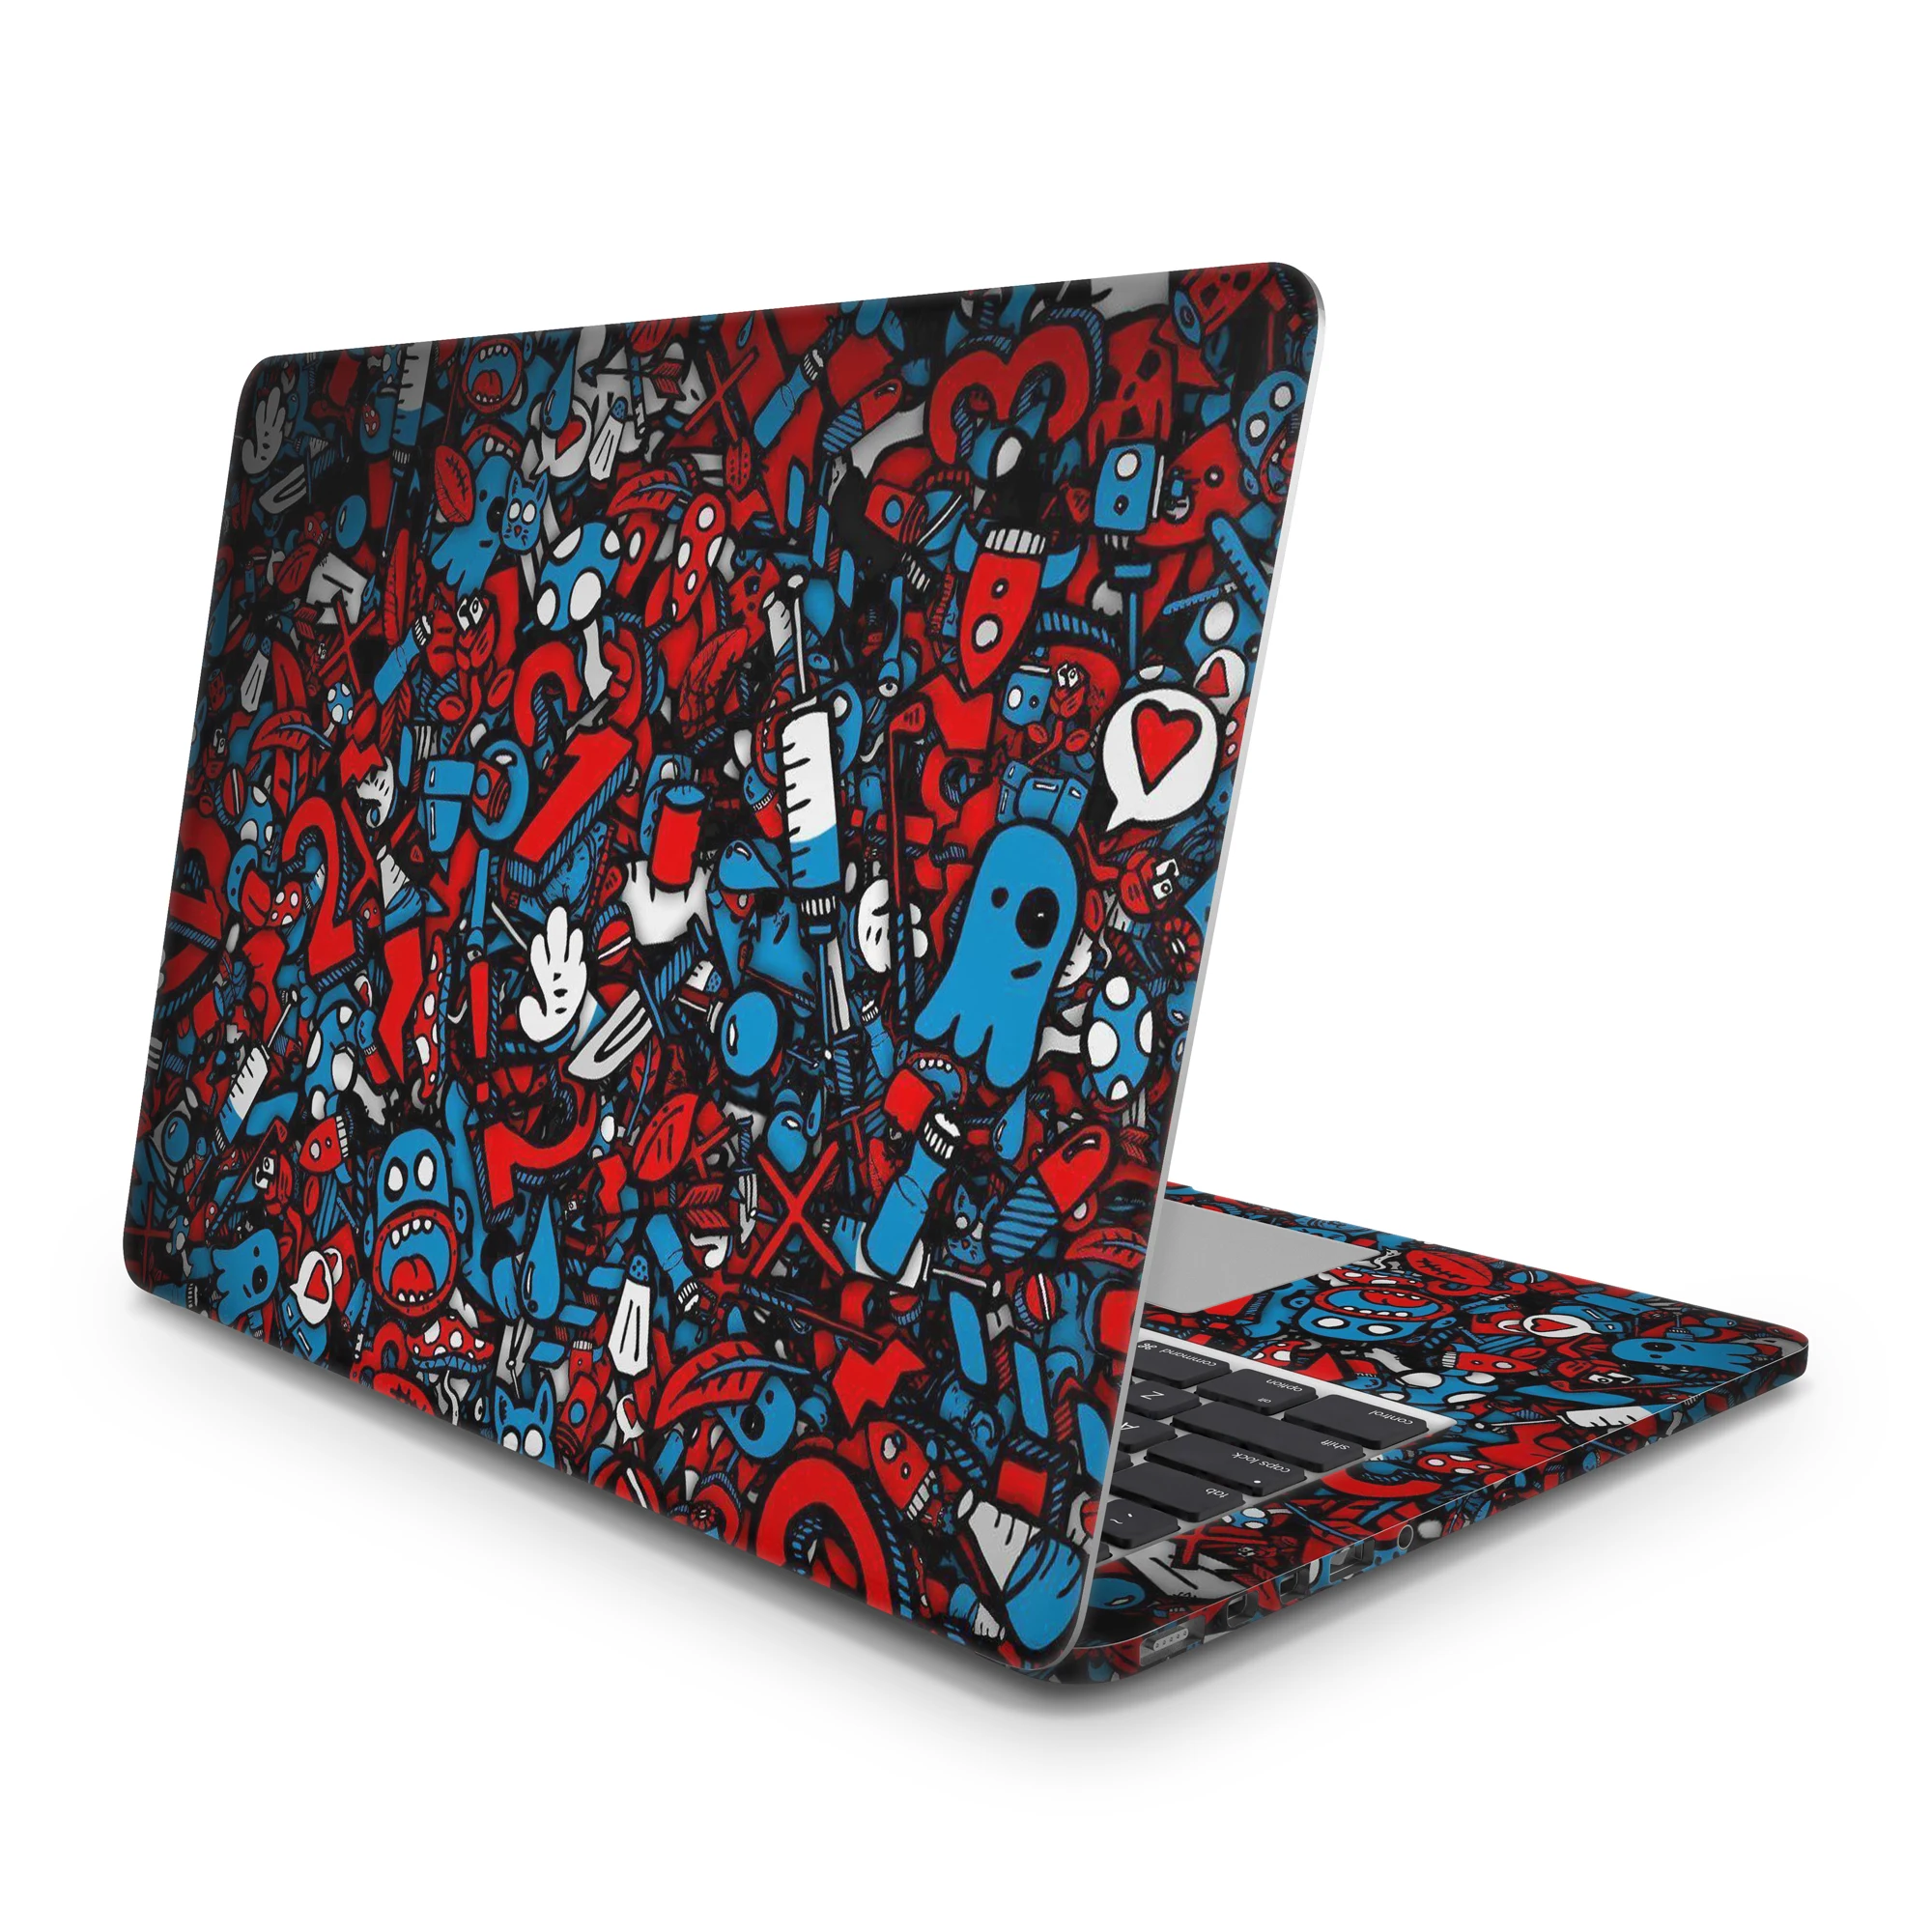 

Sticker Master Sticker Bomb 2 Laptop Vinyl Sticker Skin Cover For 10 12 13 14 15.4 15.6 16 17 19 " Inc Notebook Decal For Macbook,Asus,Acer,Hp,Lenovo,Huawei,Dell,Msi,Apple,Toshiba,Compaq